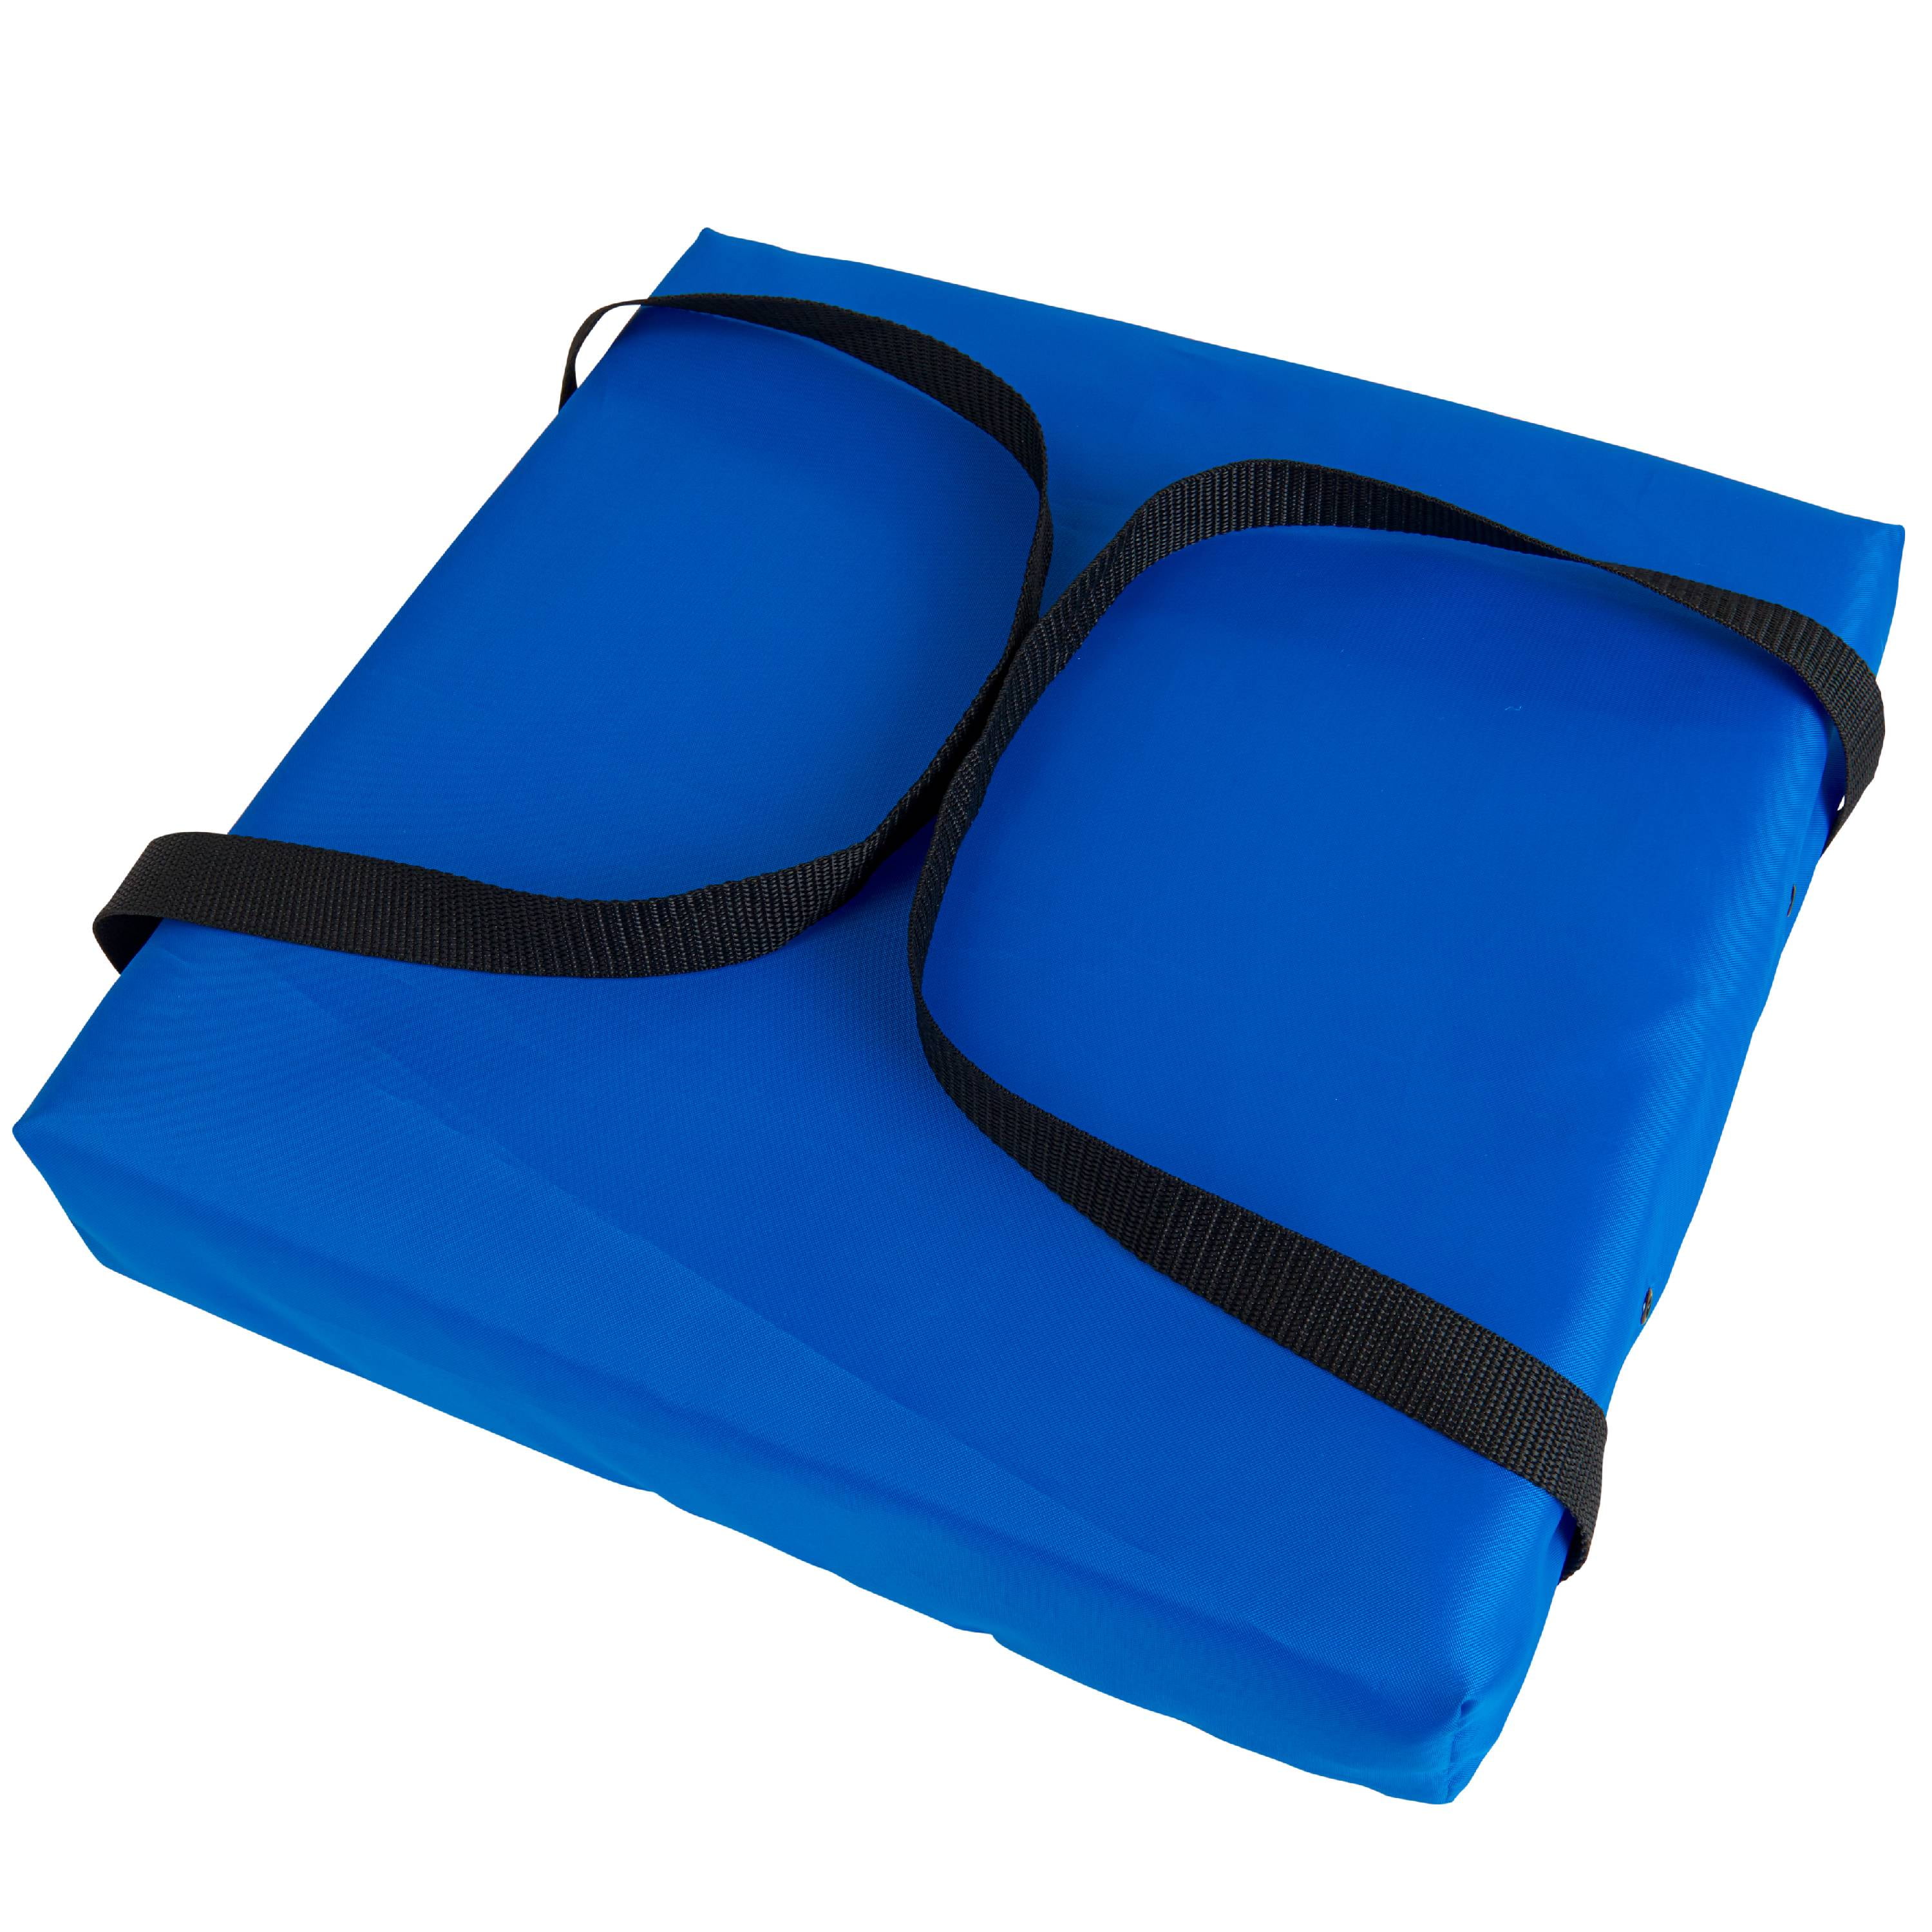 Details about   Flotation Device Foam  Boat Cushion Throwable Life Saver USCG Approved 